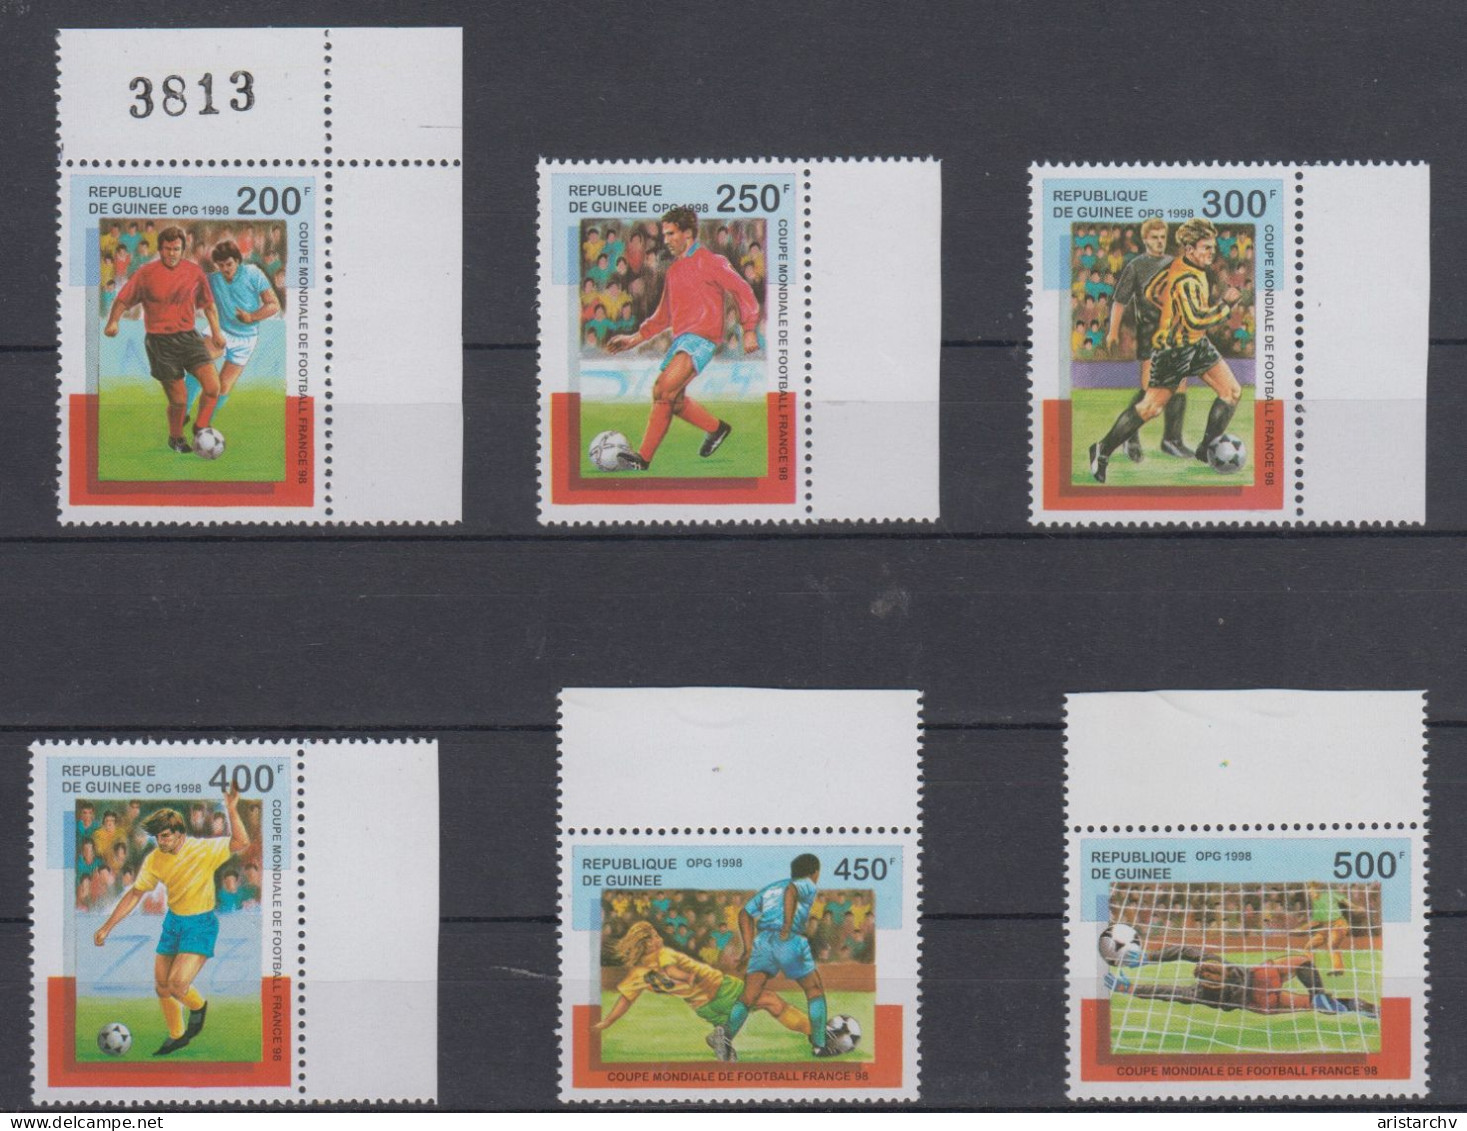 GUINEE 1998 FOOTBALL WORLD CUP S/SHEET AND 6 STAMPS - 1998 – Frankrijk